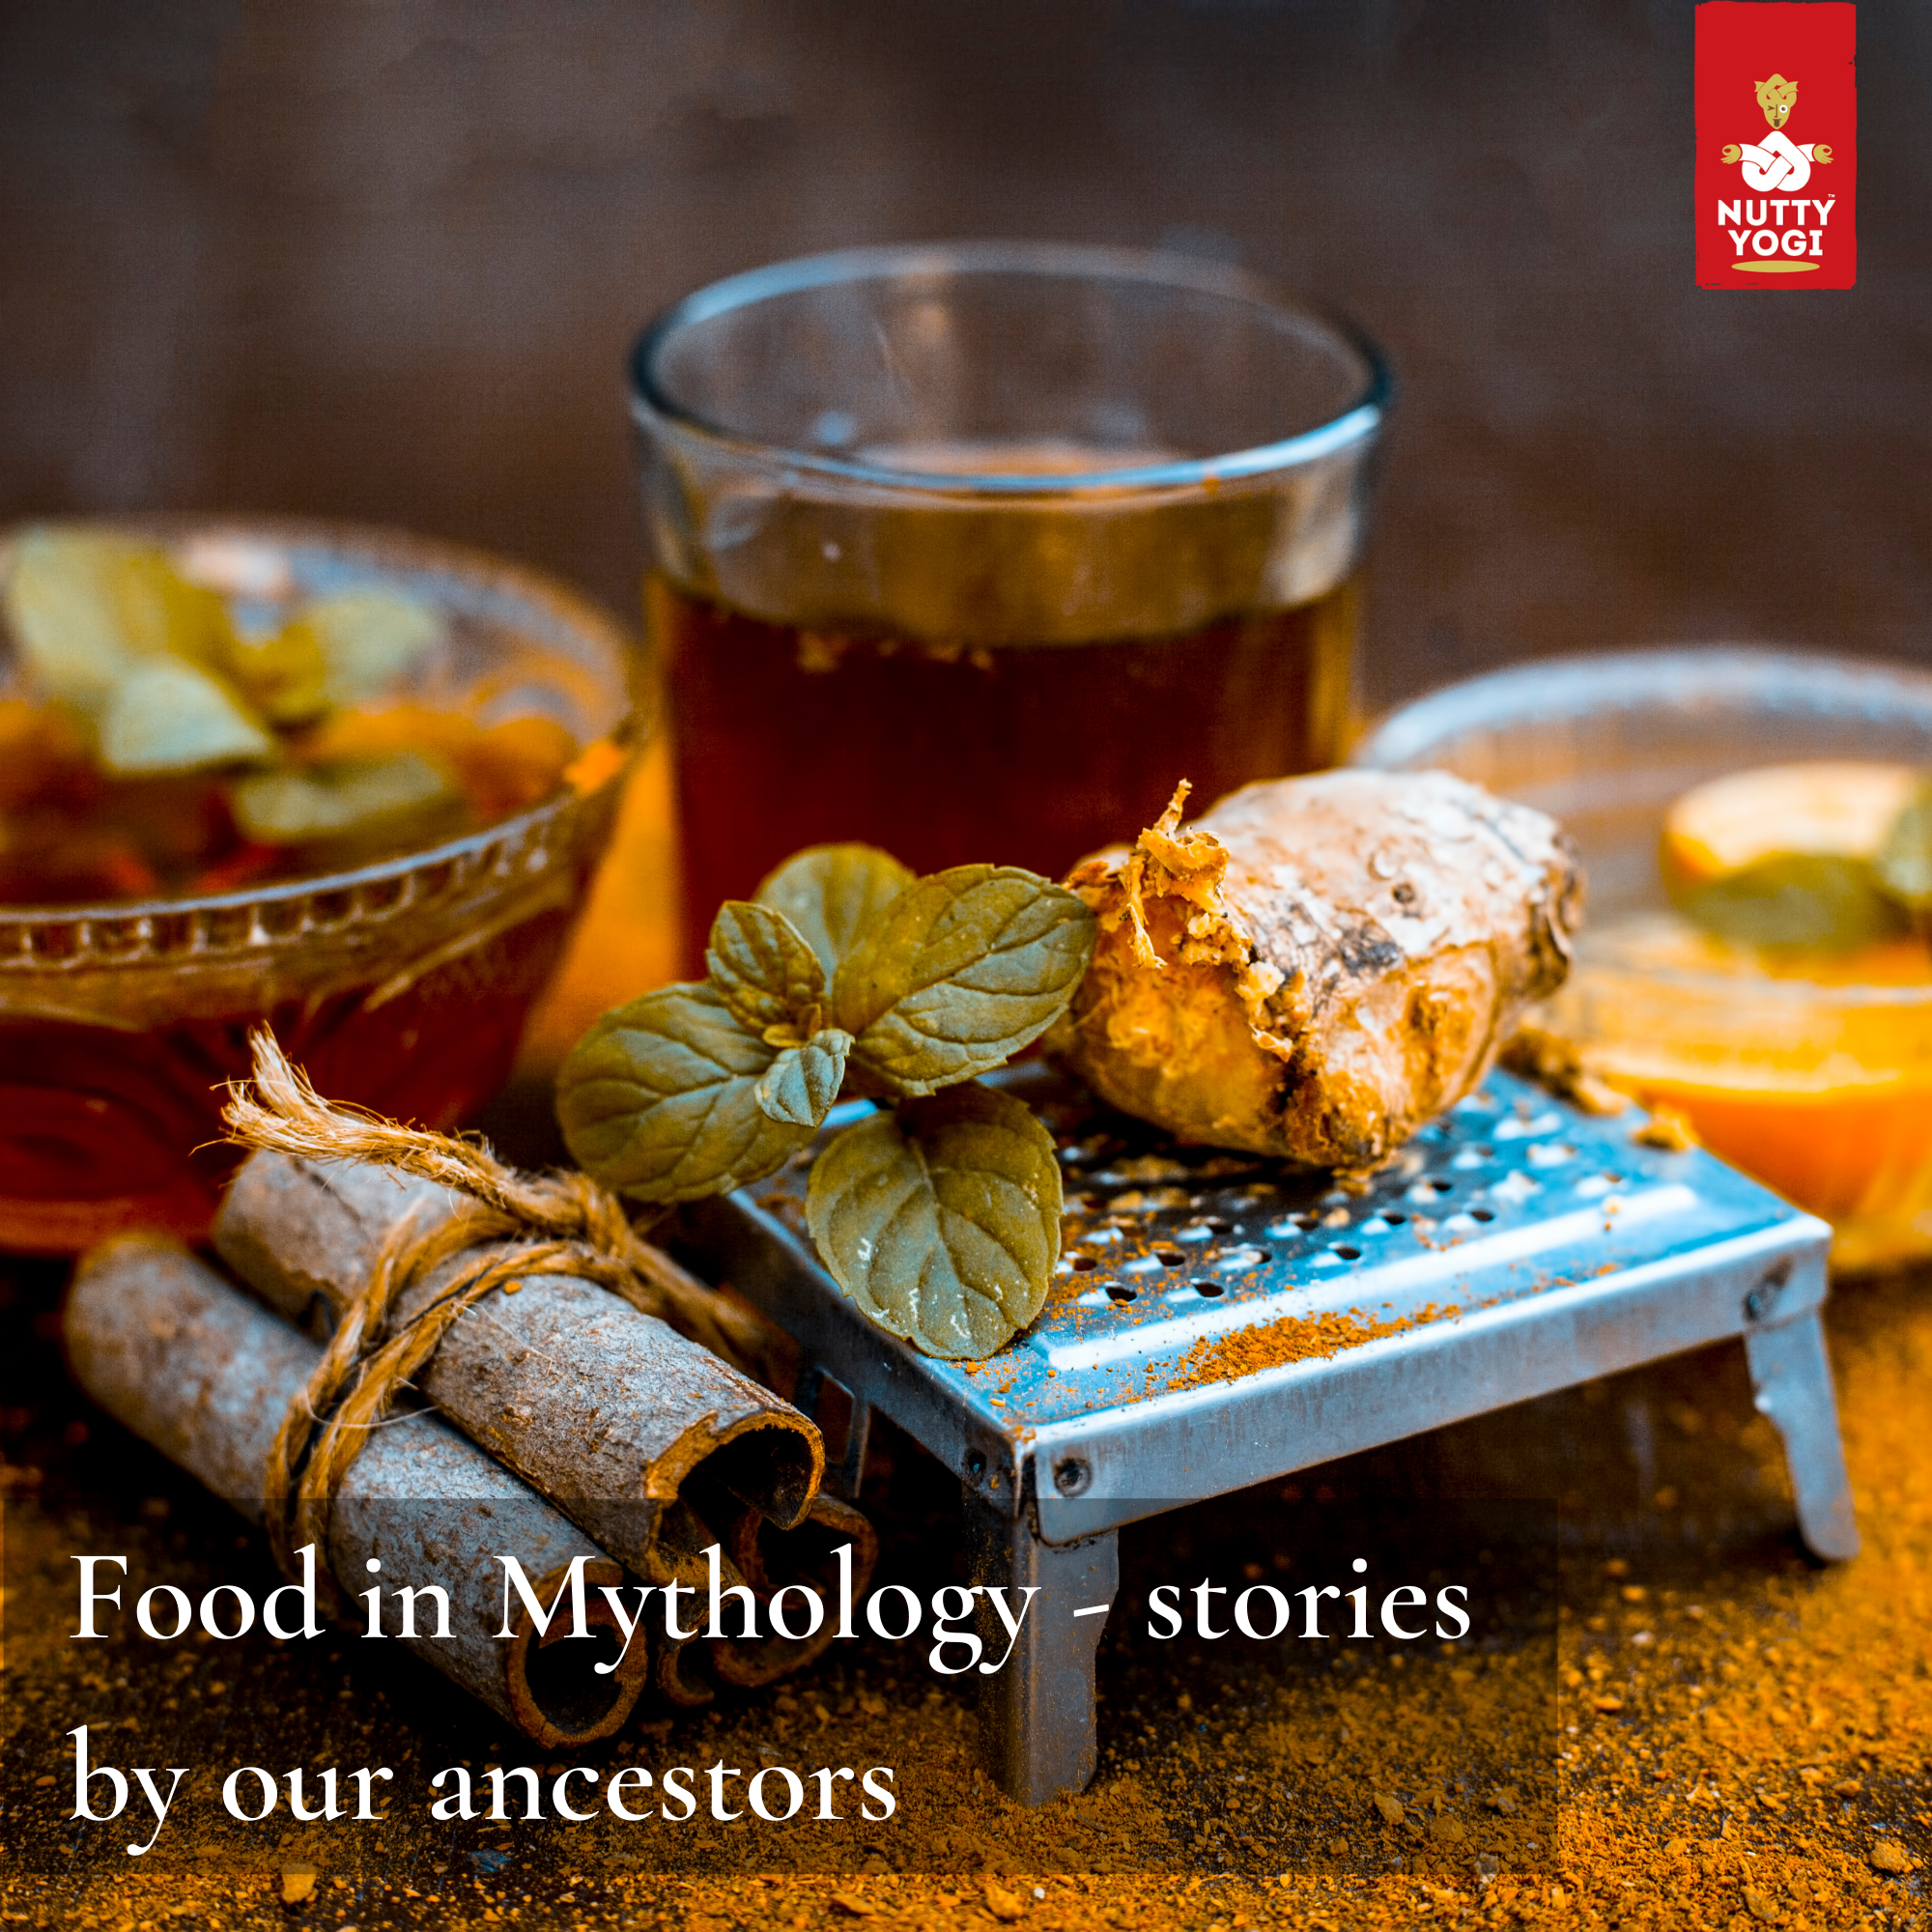 Food in Mythology - stories by our ancestors